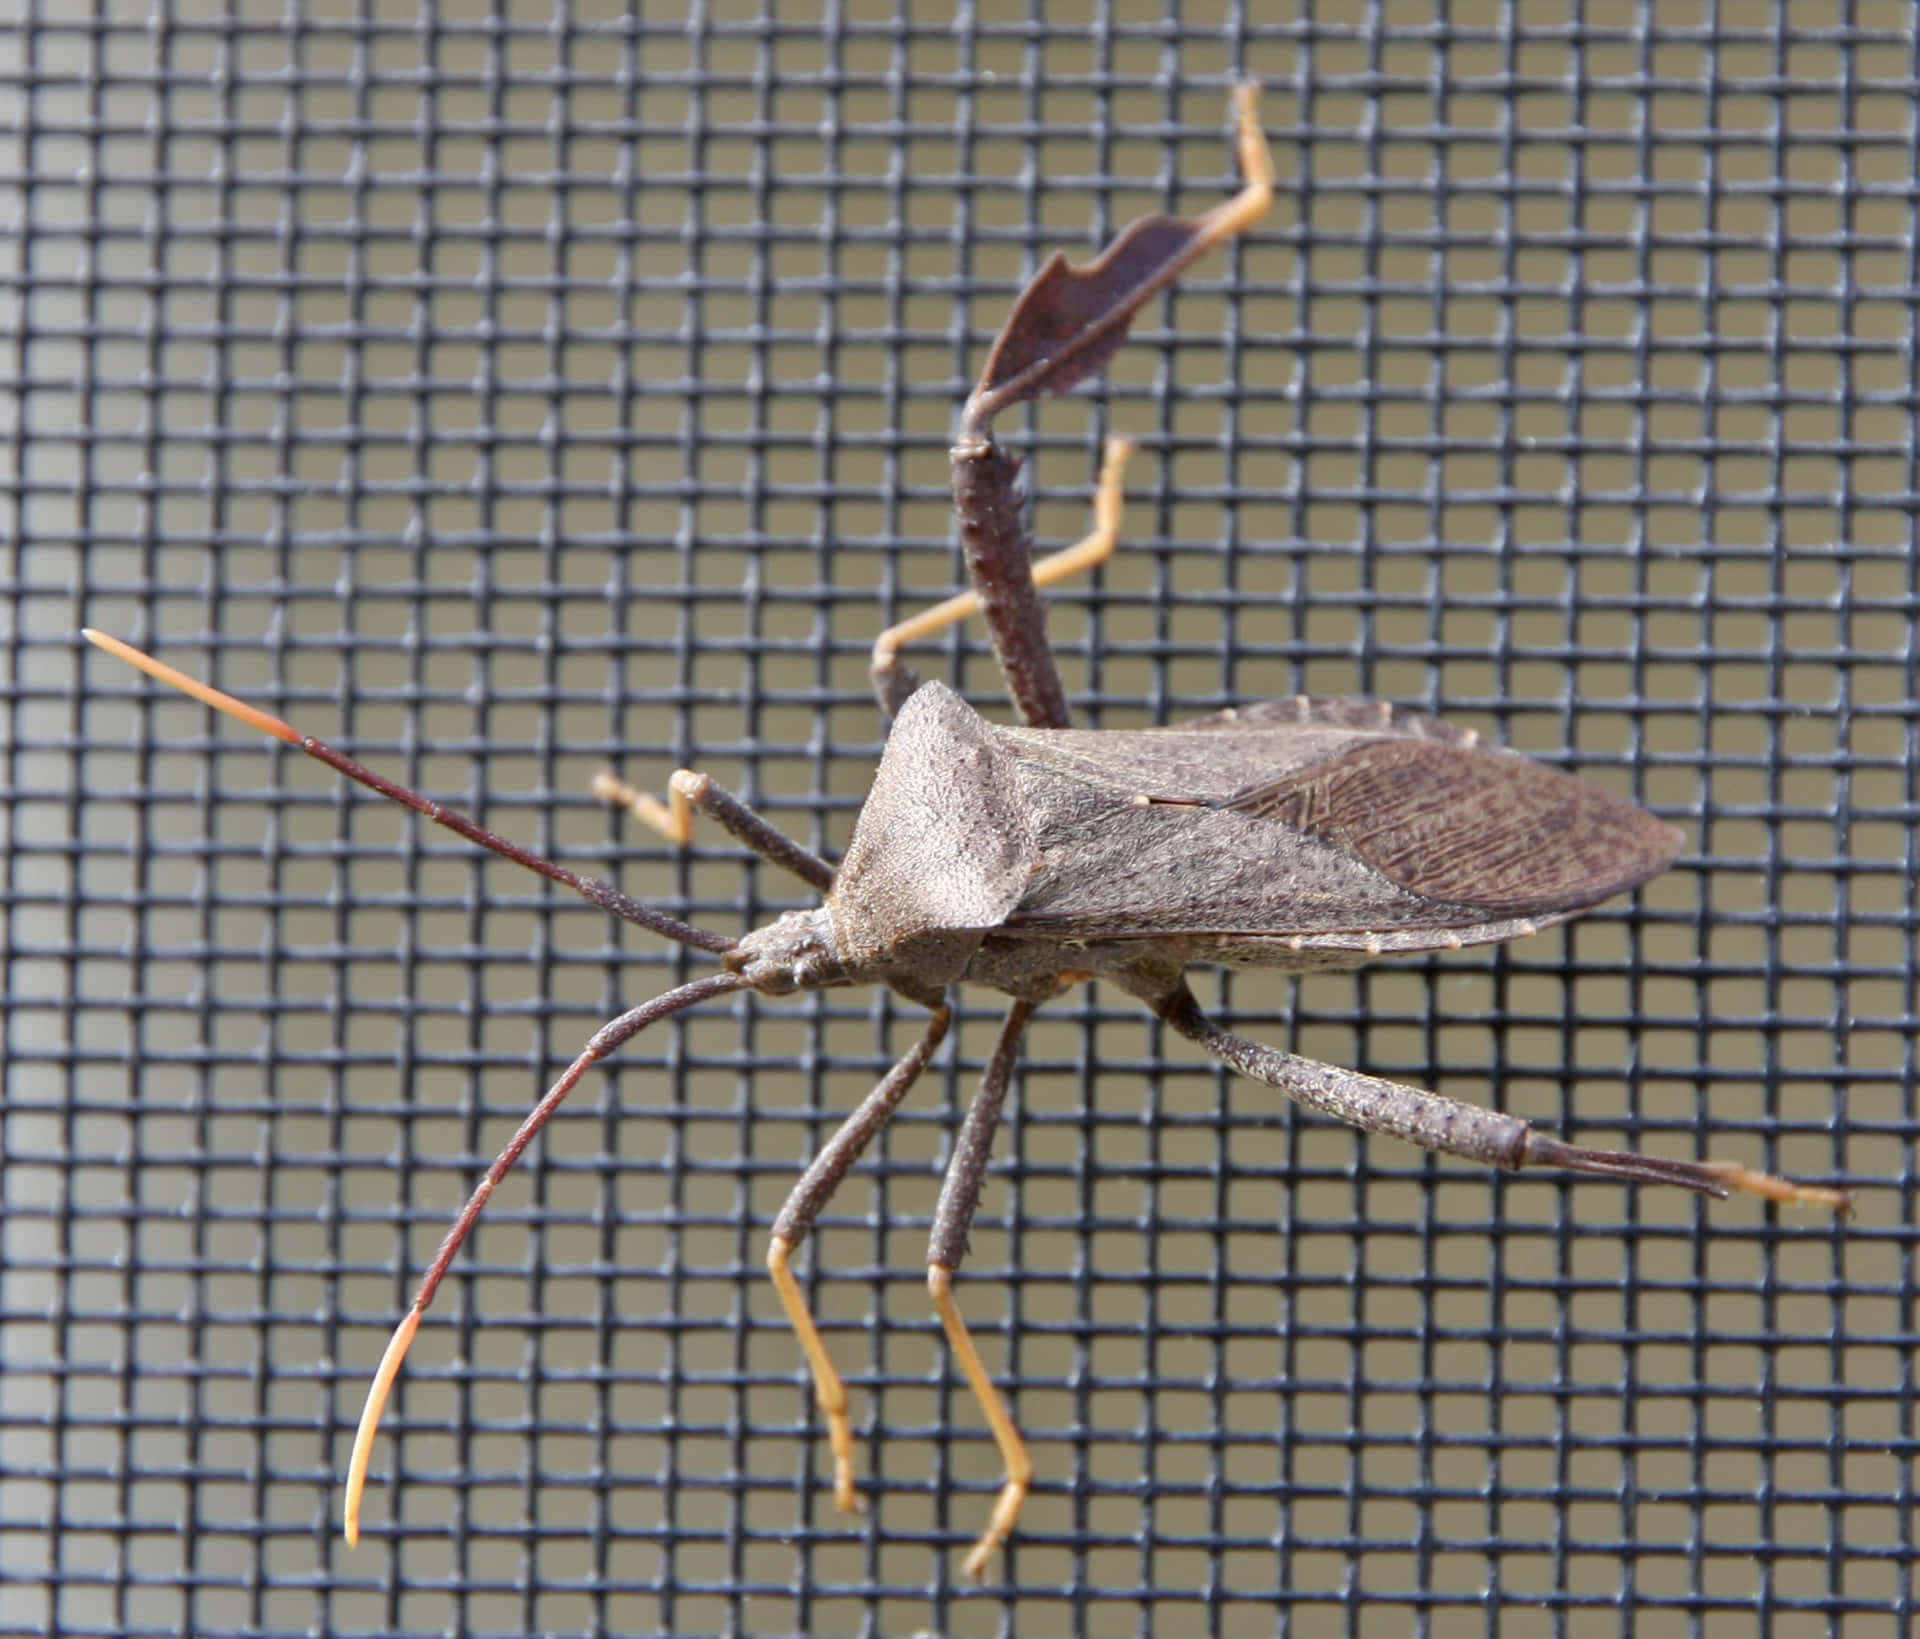 Leaffooted_ Bug_ On_ Screen Wallpaper